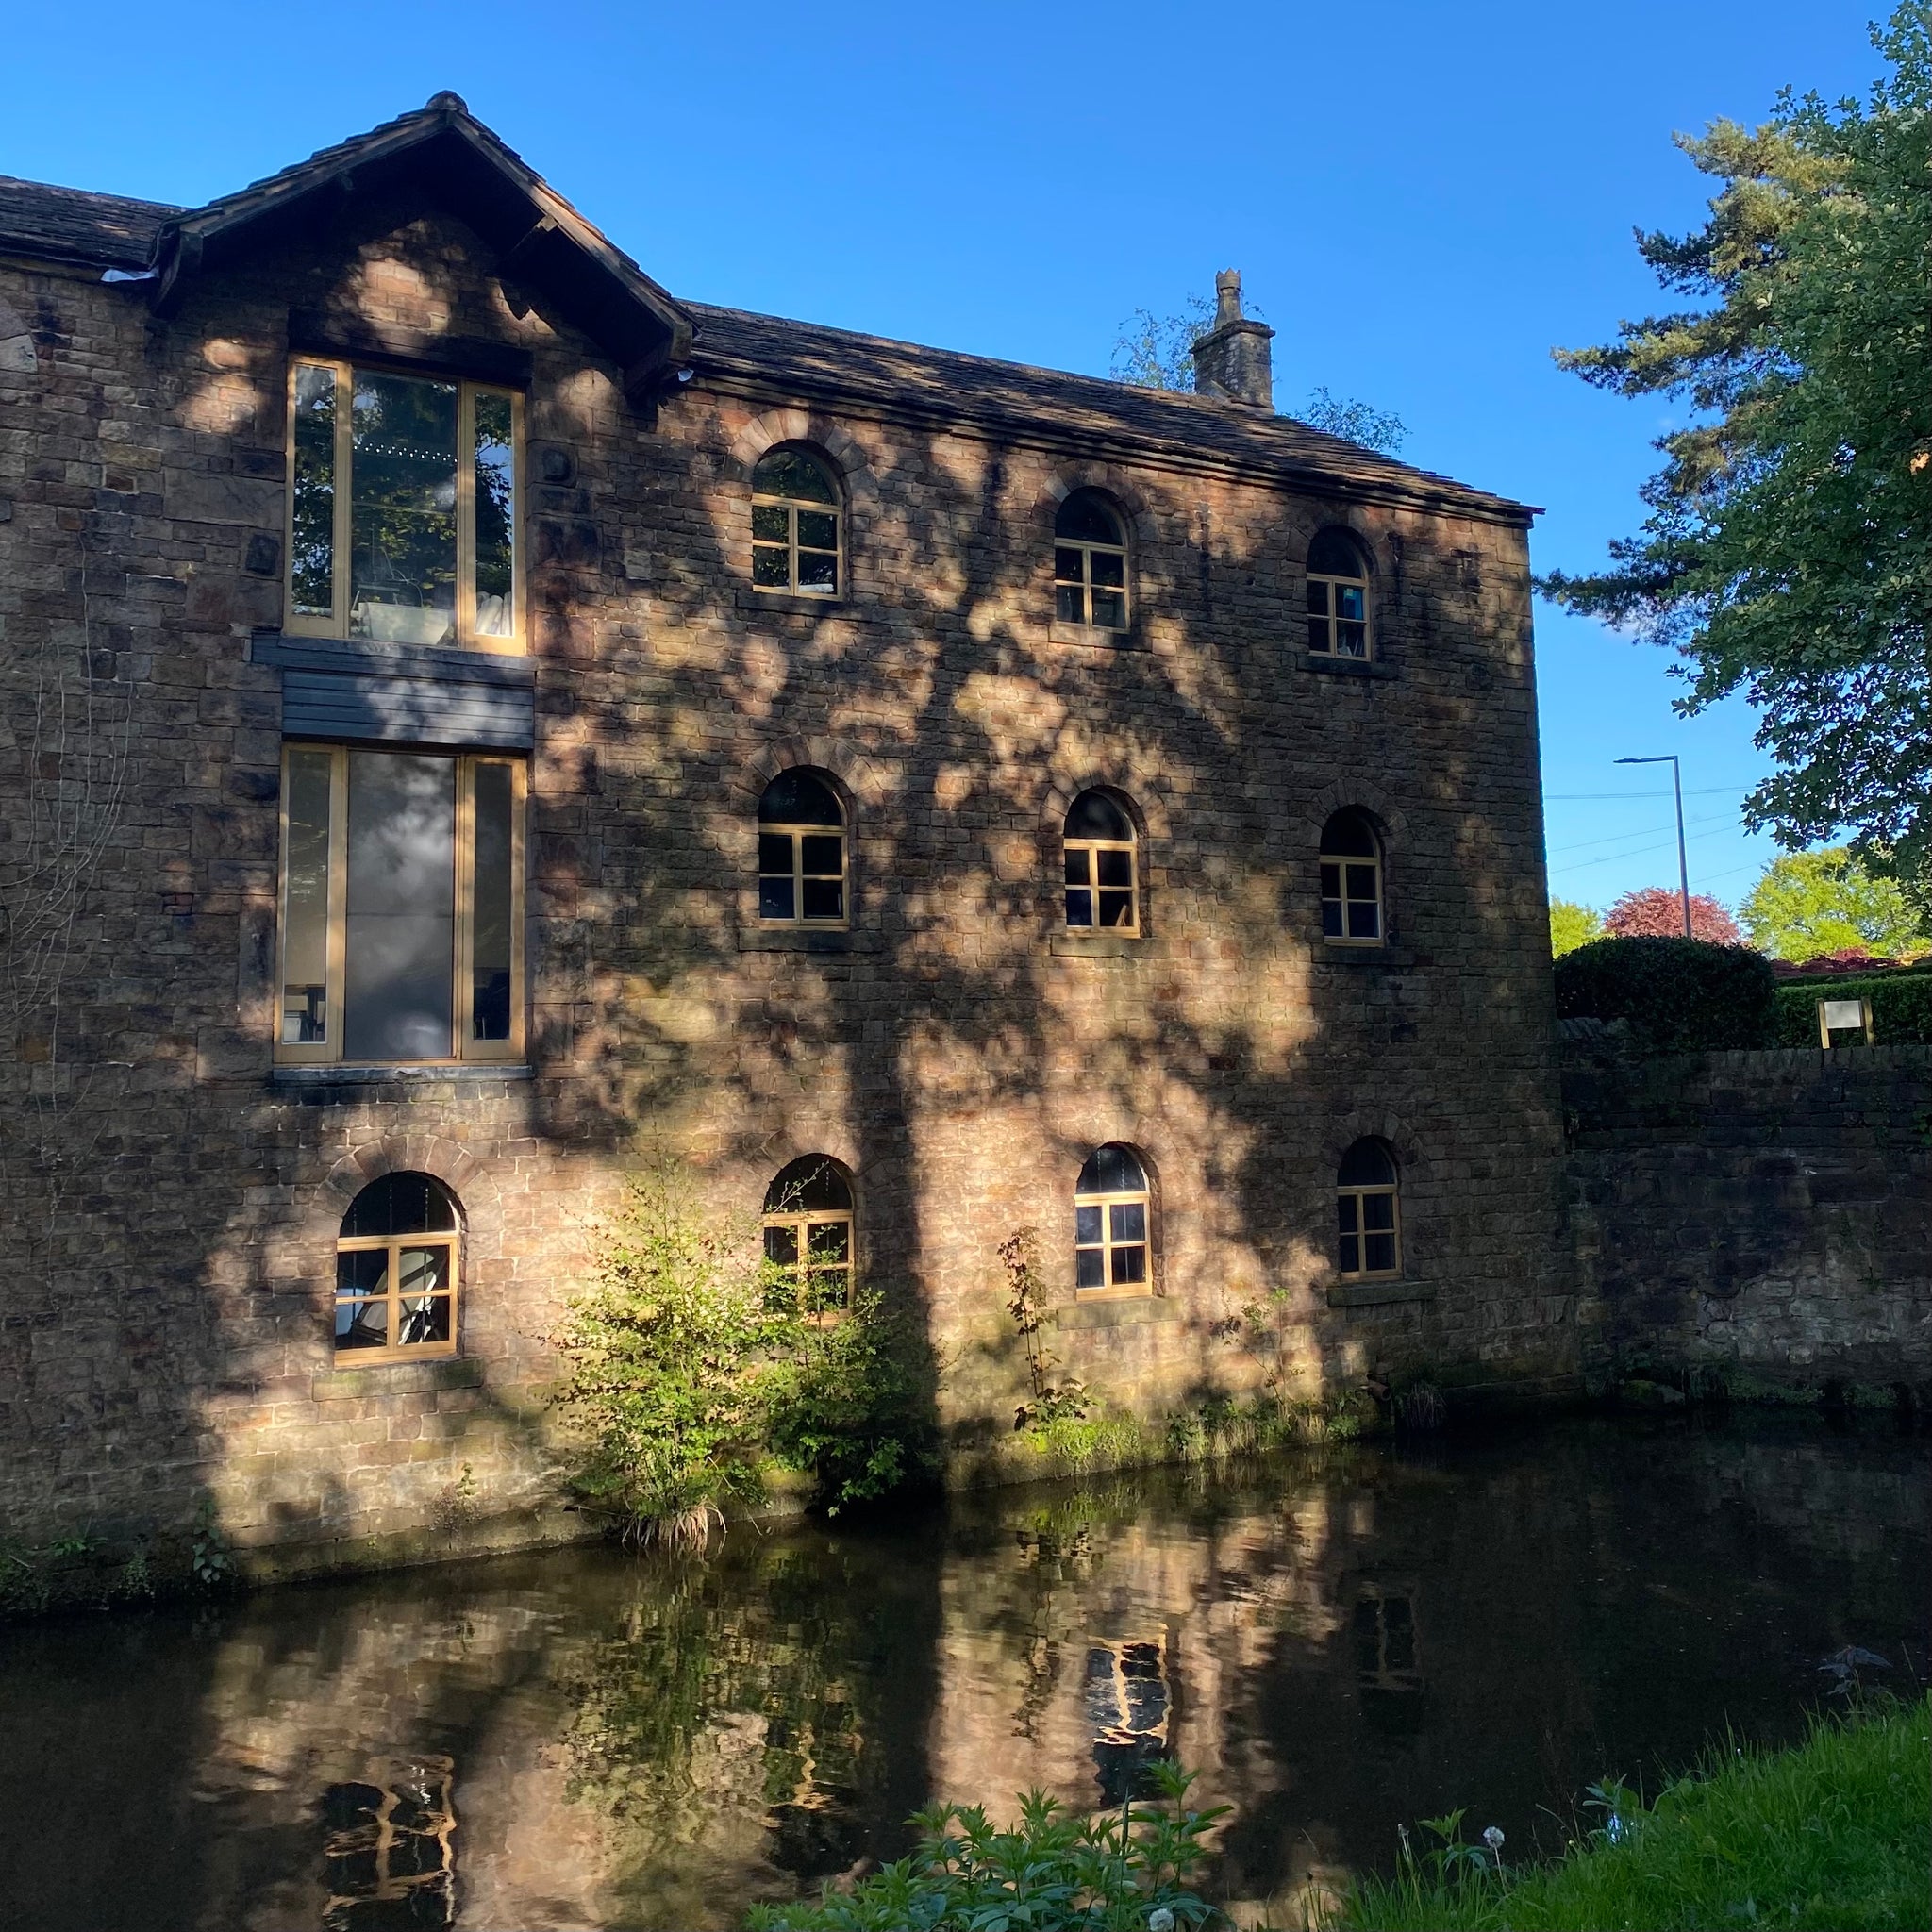 The canalside mill where Rosie Kent is based